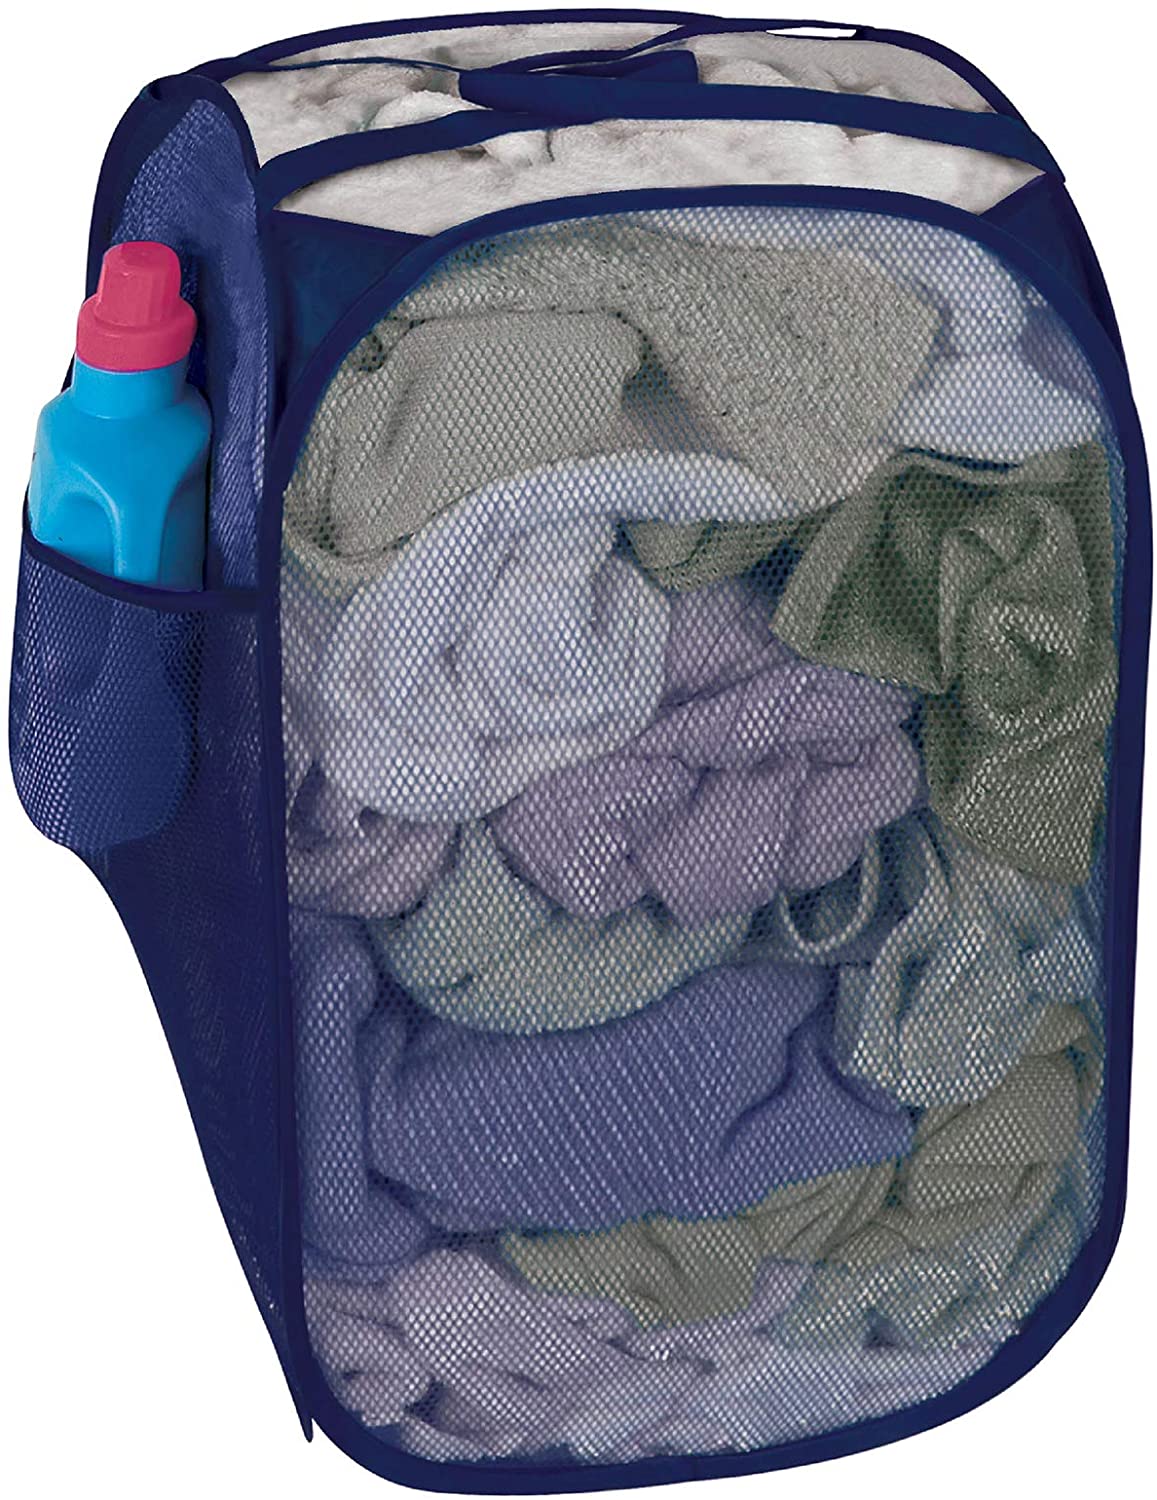 Pop-Up Laundry Hamper with Easy Carry Handles and Side Pocket - Smart Design® 15